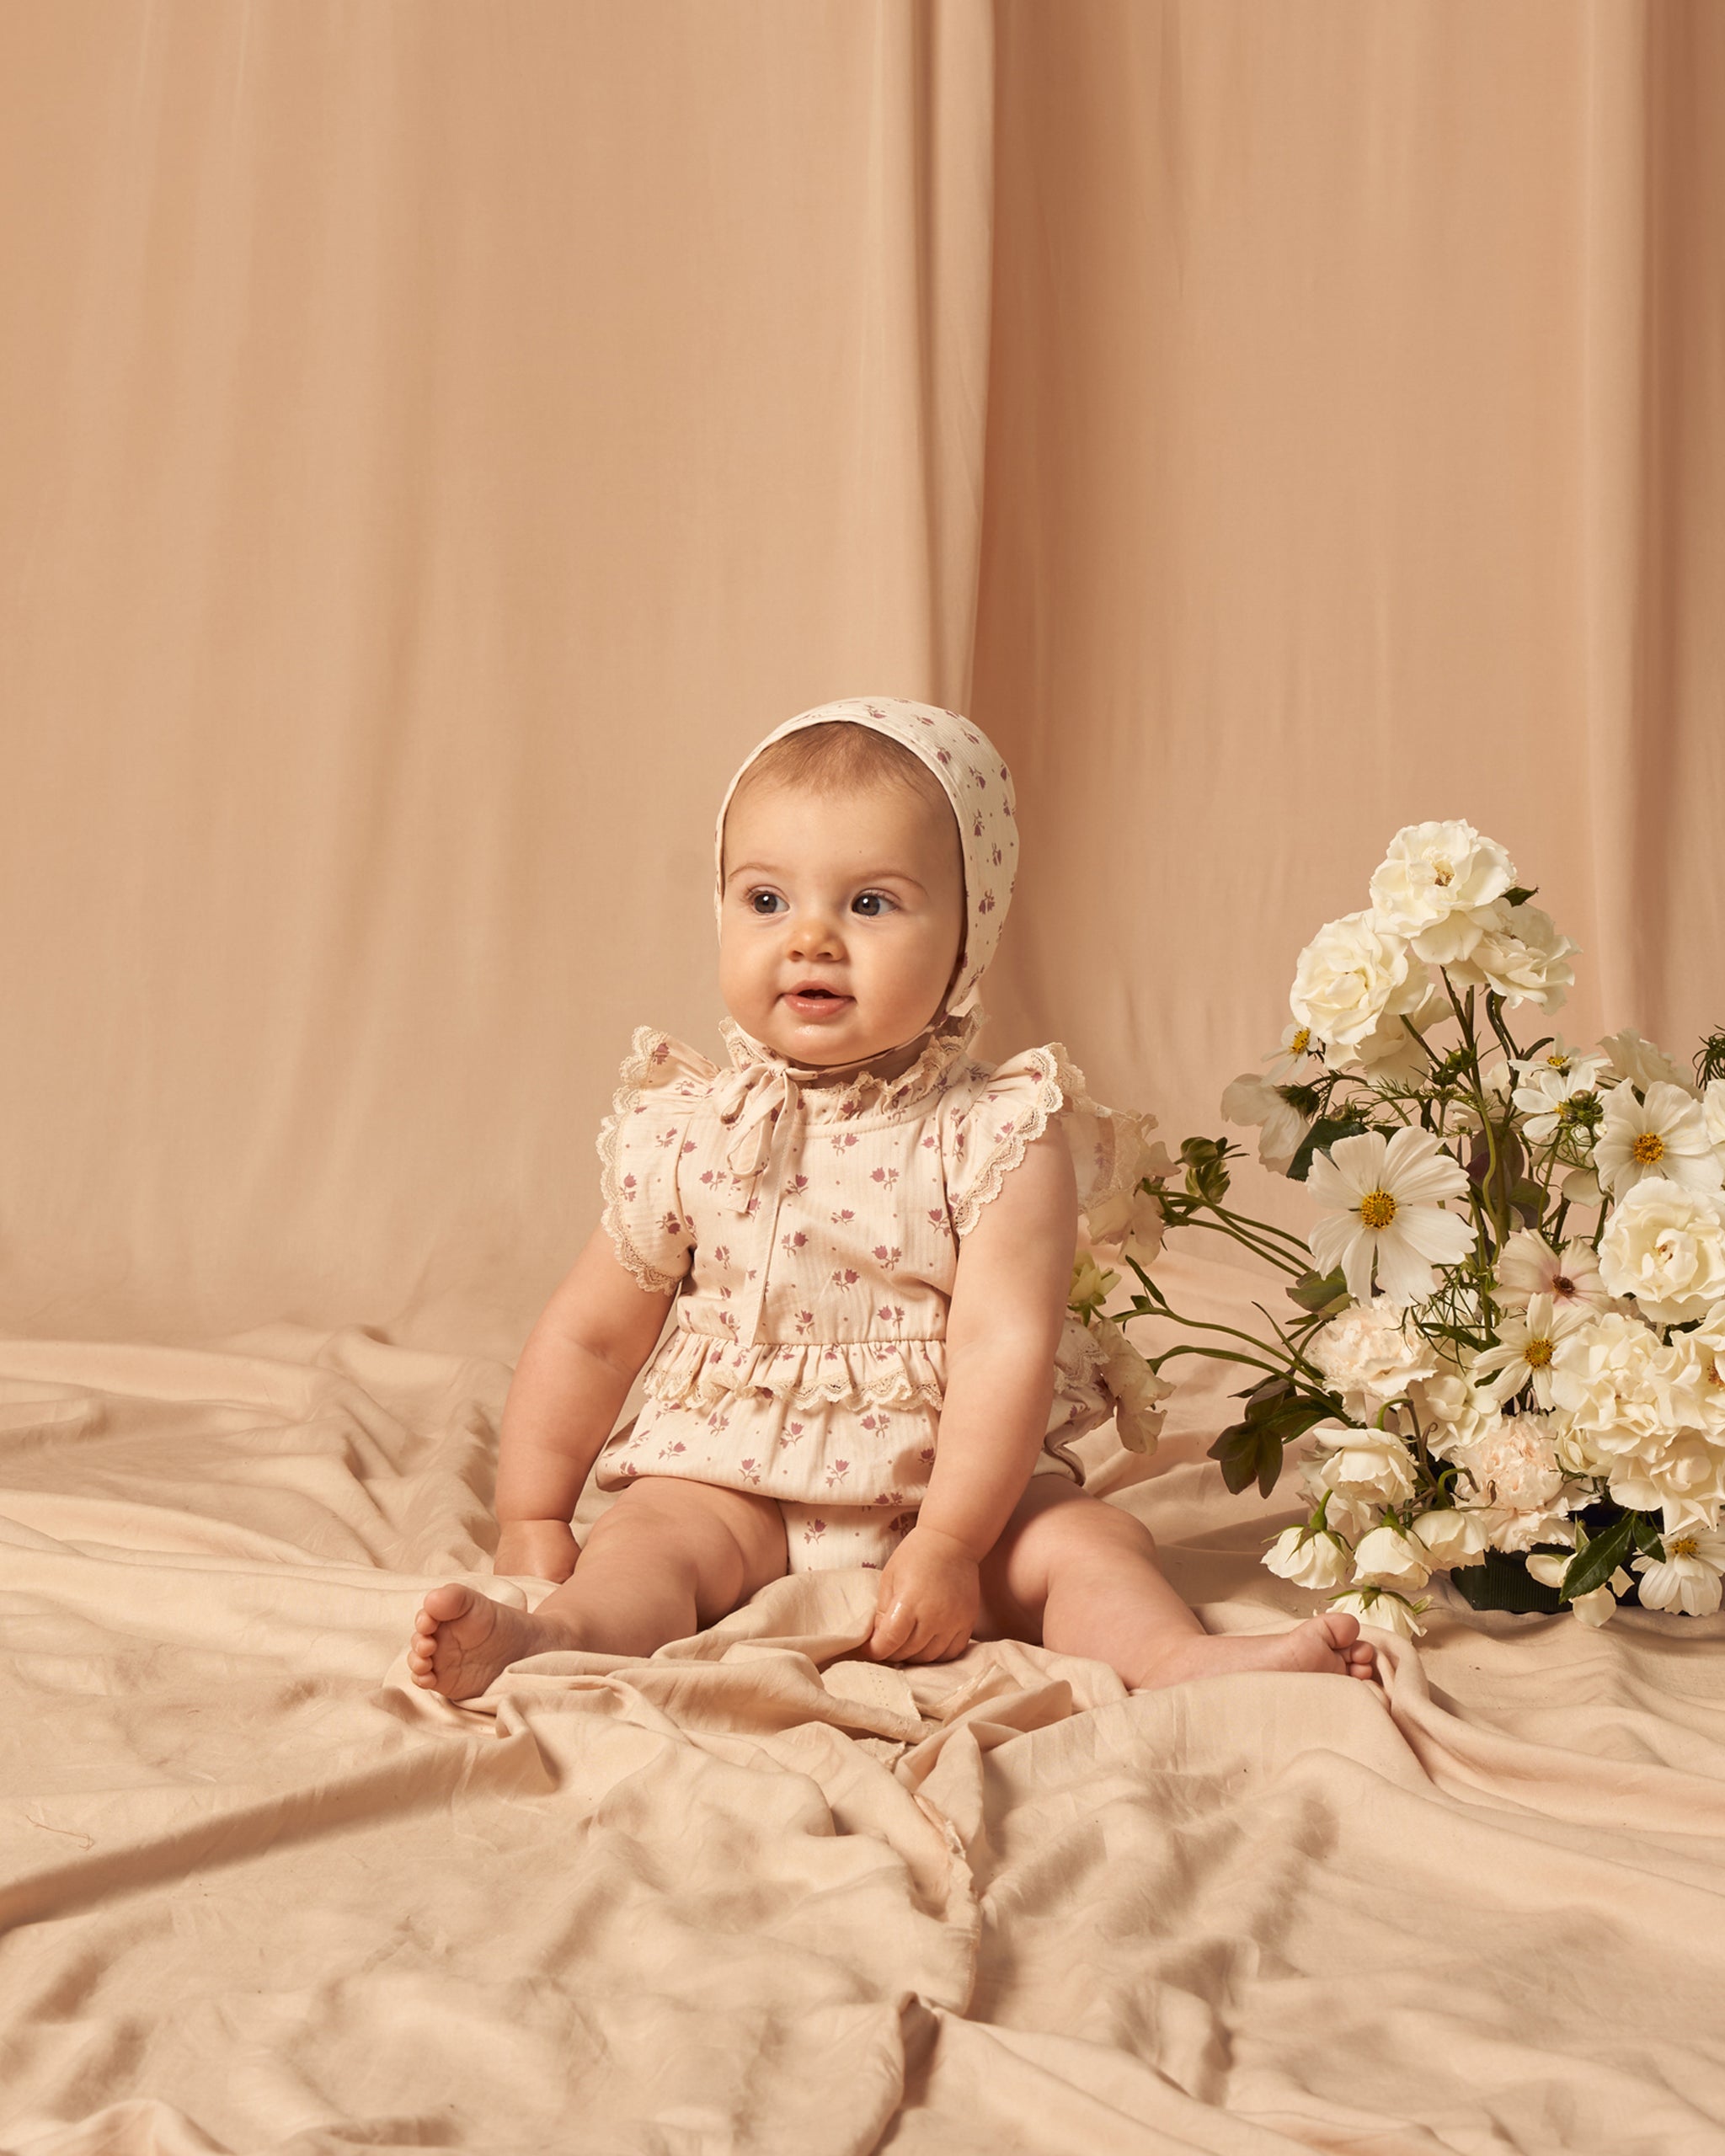 Alice Romper || Tulips - Rylee + Cru | Kids Clothes | Trendy Baby Clothes | Modern Infant Outfits |